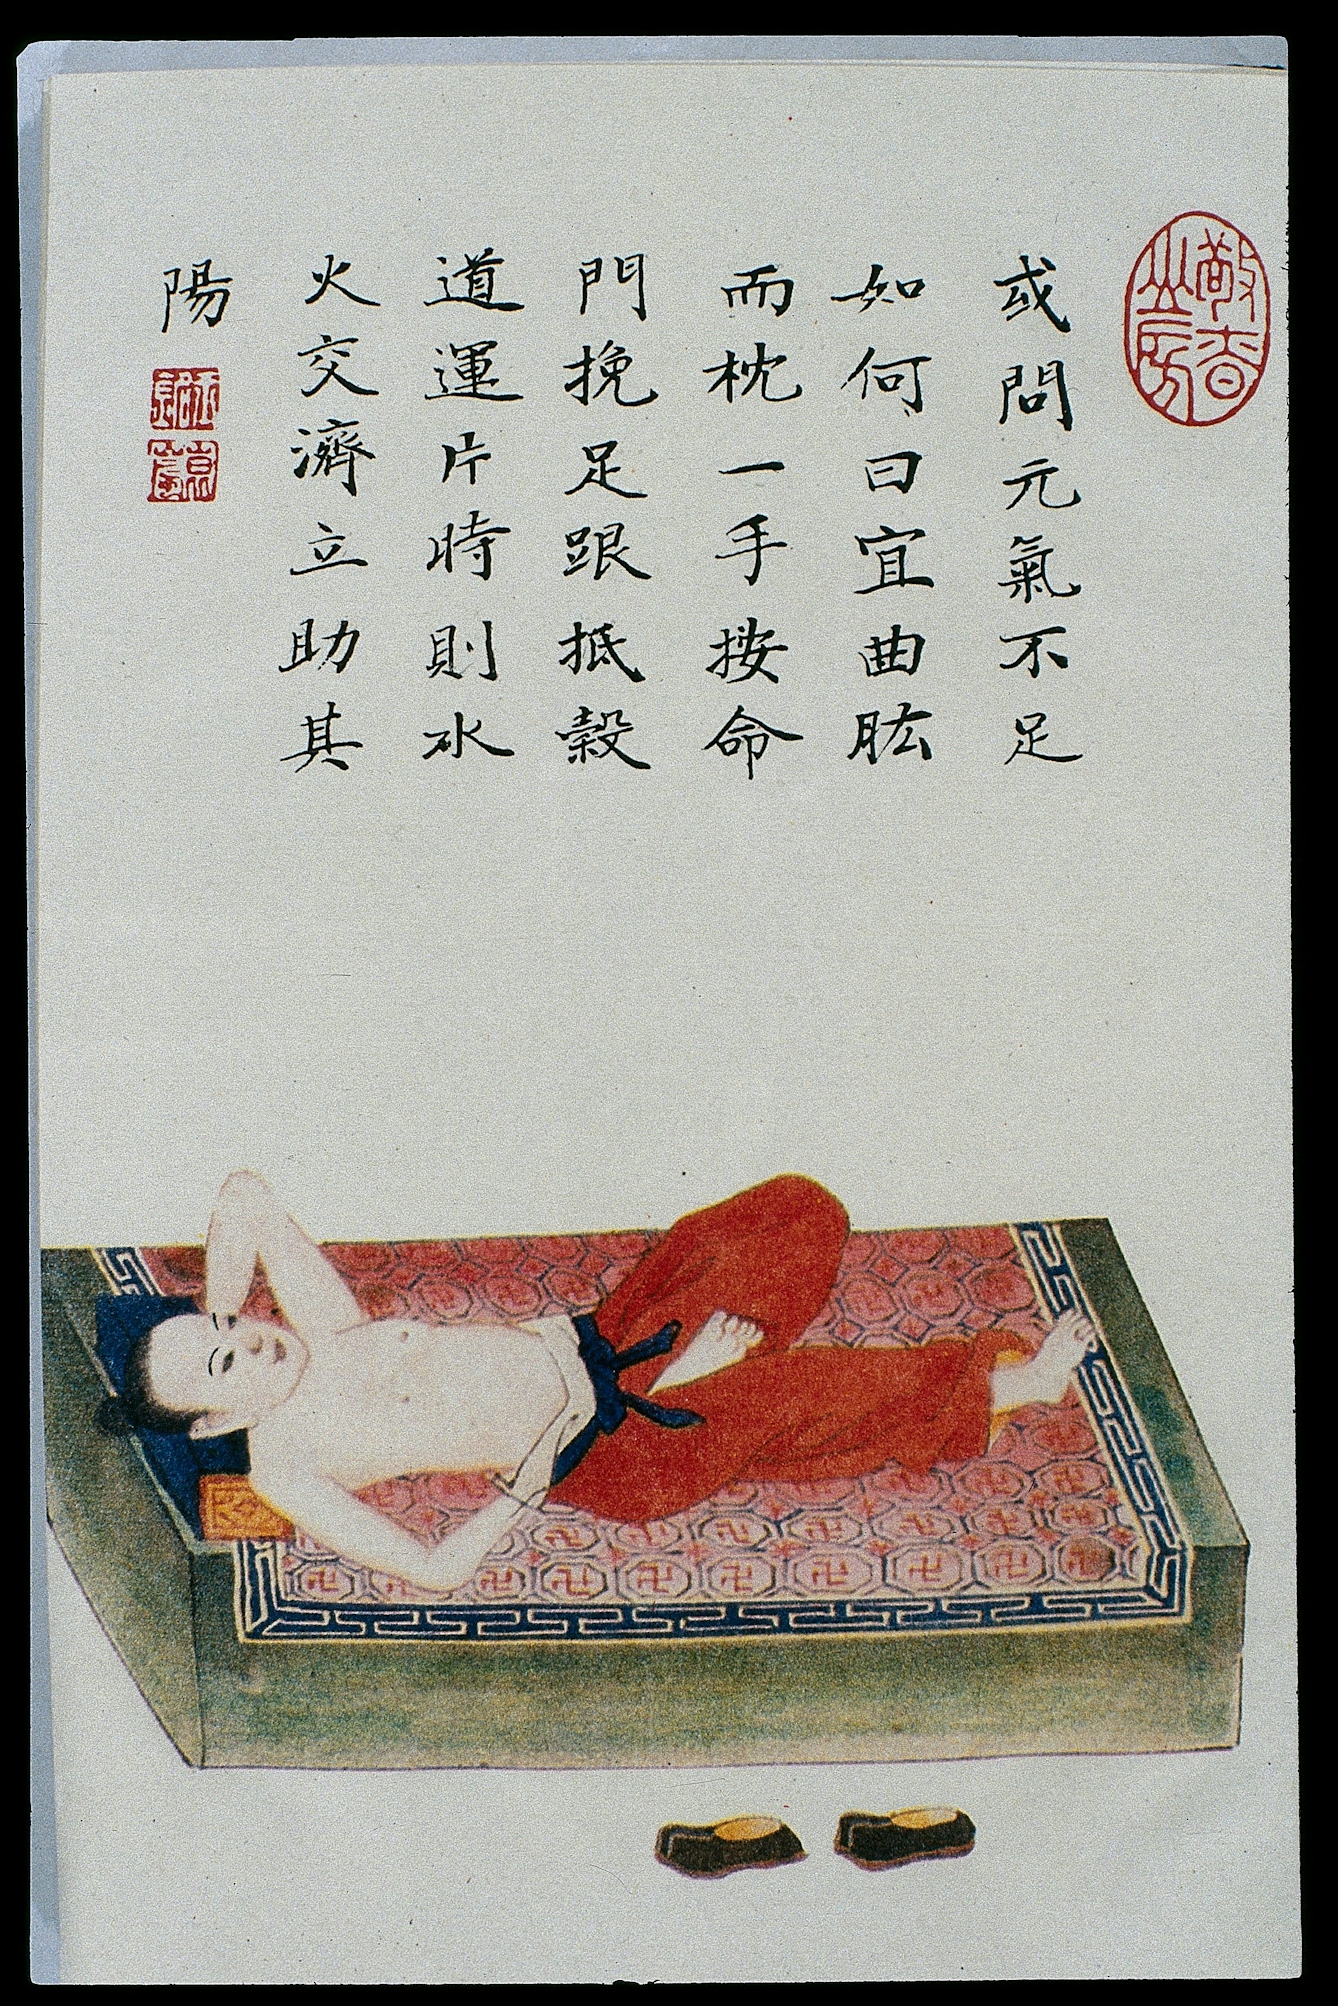 Painting showing a person wearing red trousers reclining on a bed. They are barefoot and shirtless and have one arm behind their head and one leg curled up towards their body, and their shoes are in front of the bed.